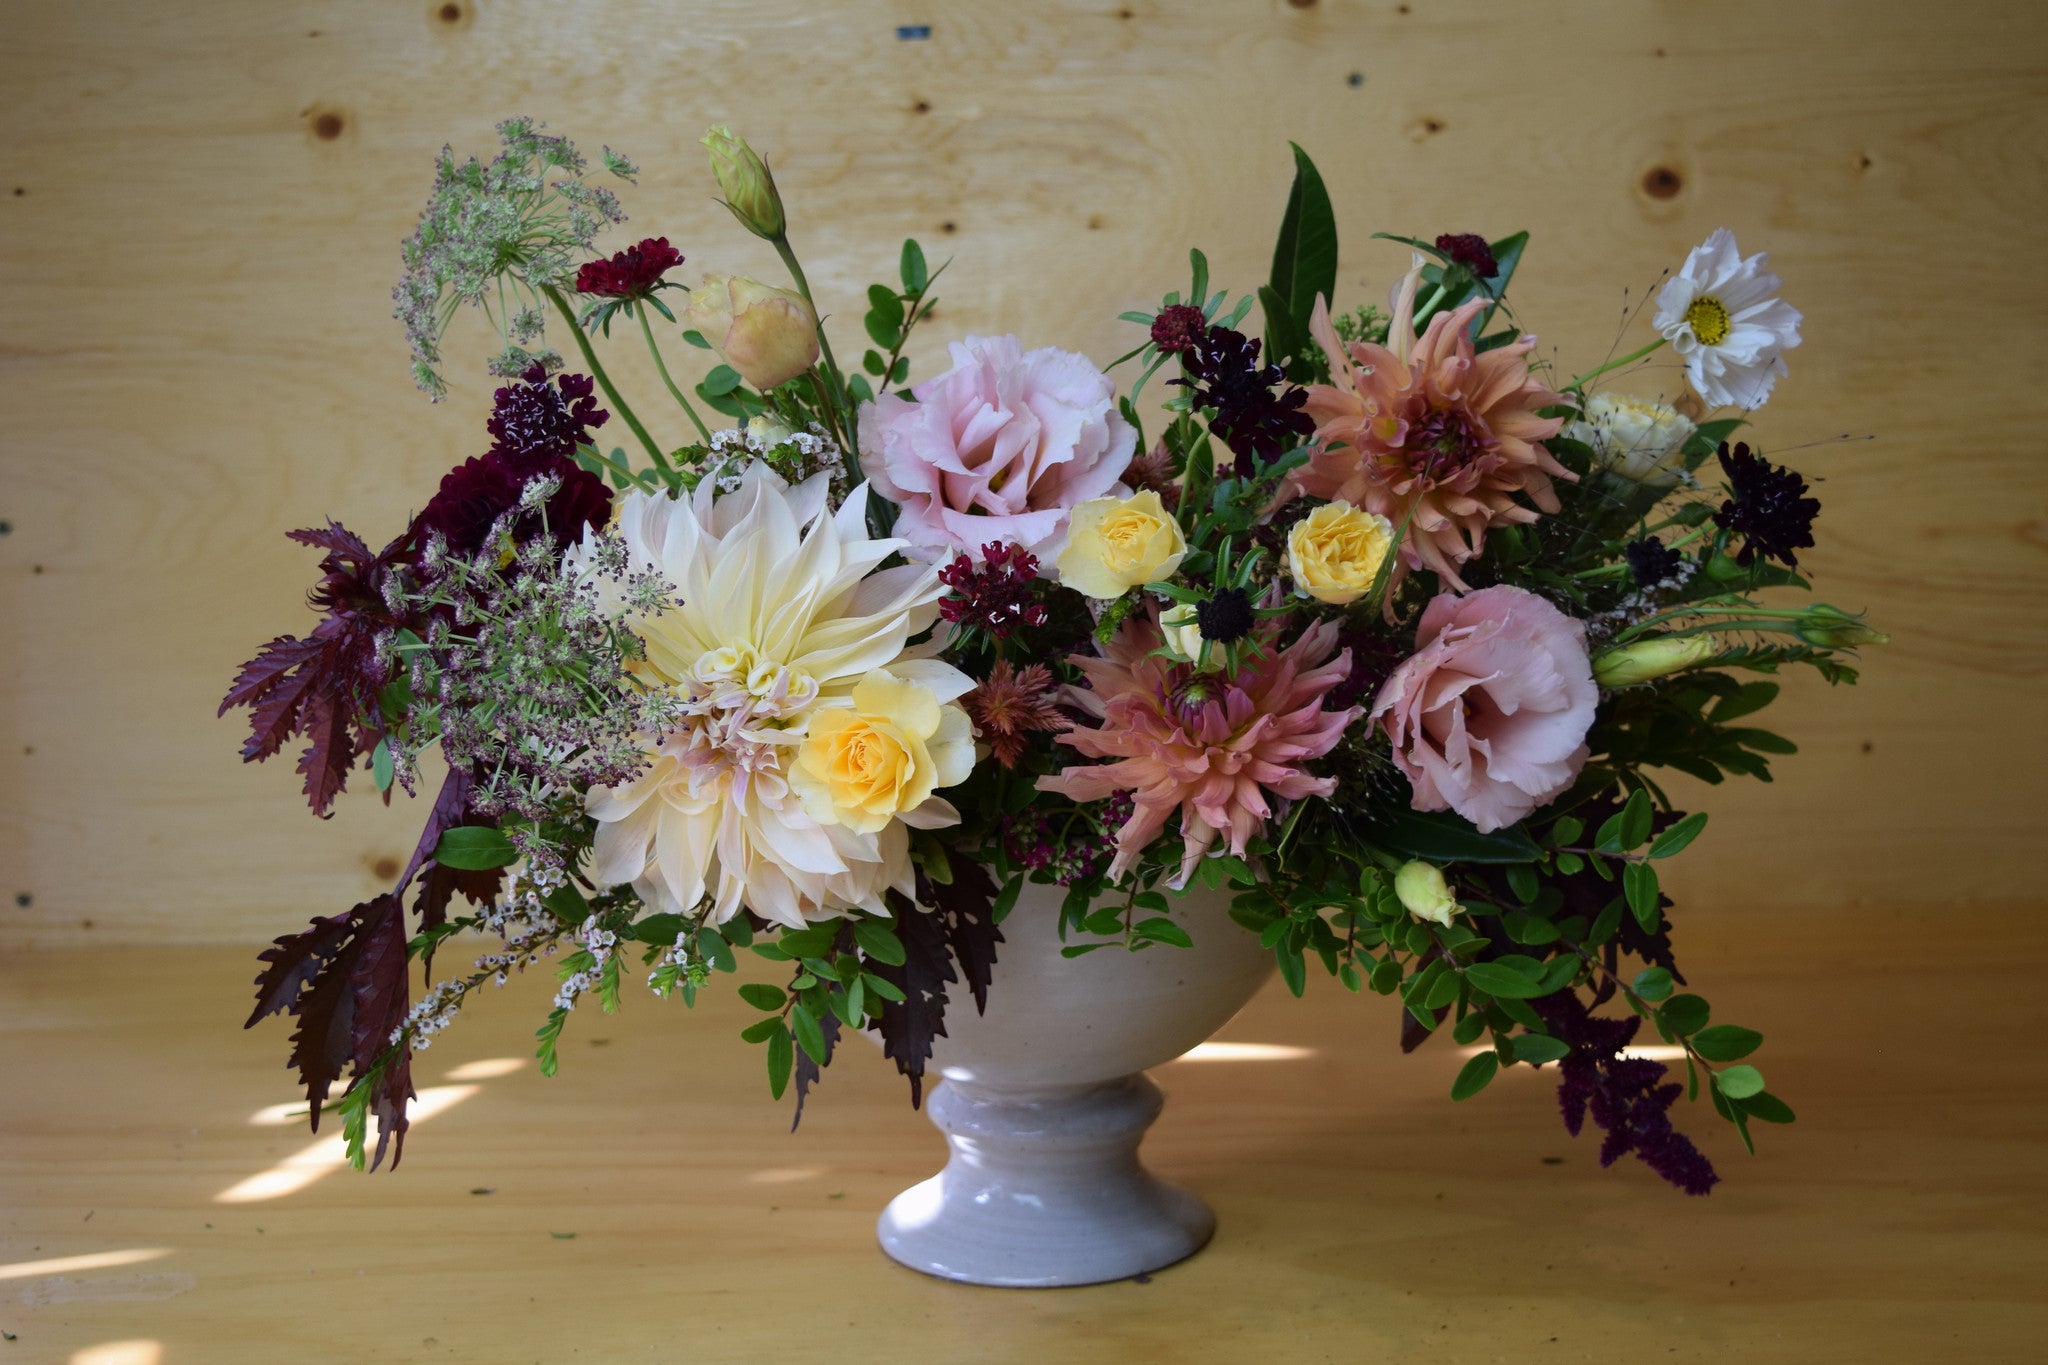 HOW TO MAKE YOUR OWN FALL FLORAL ARRANGEMENT